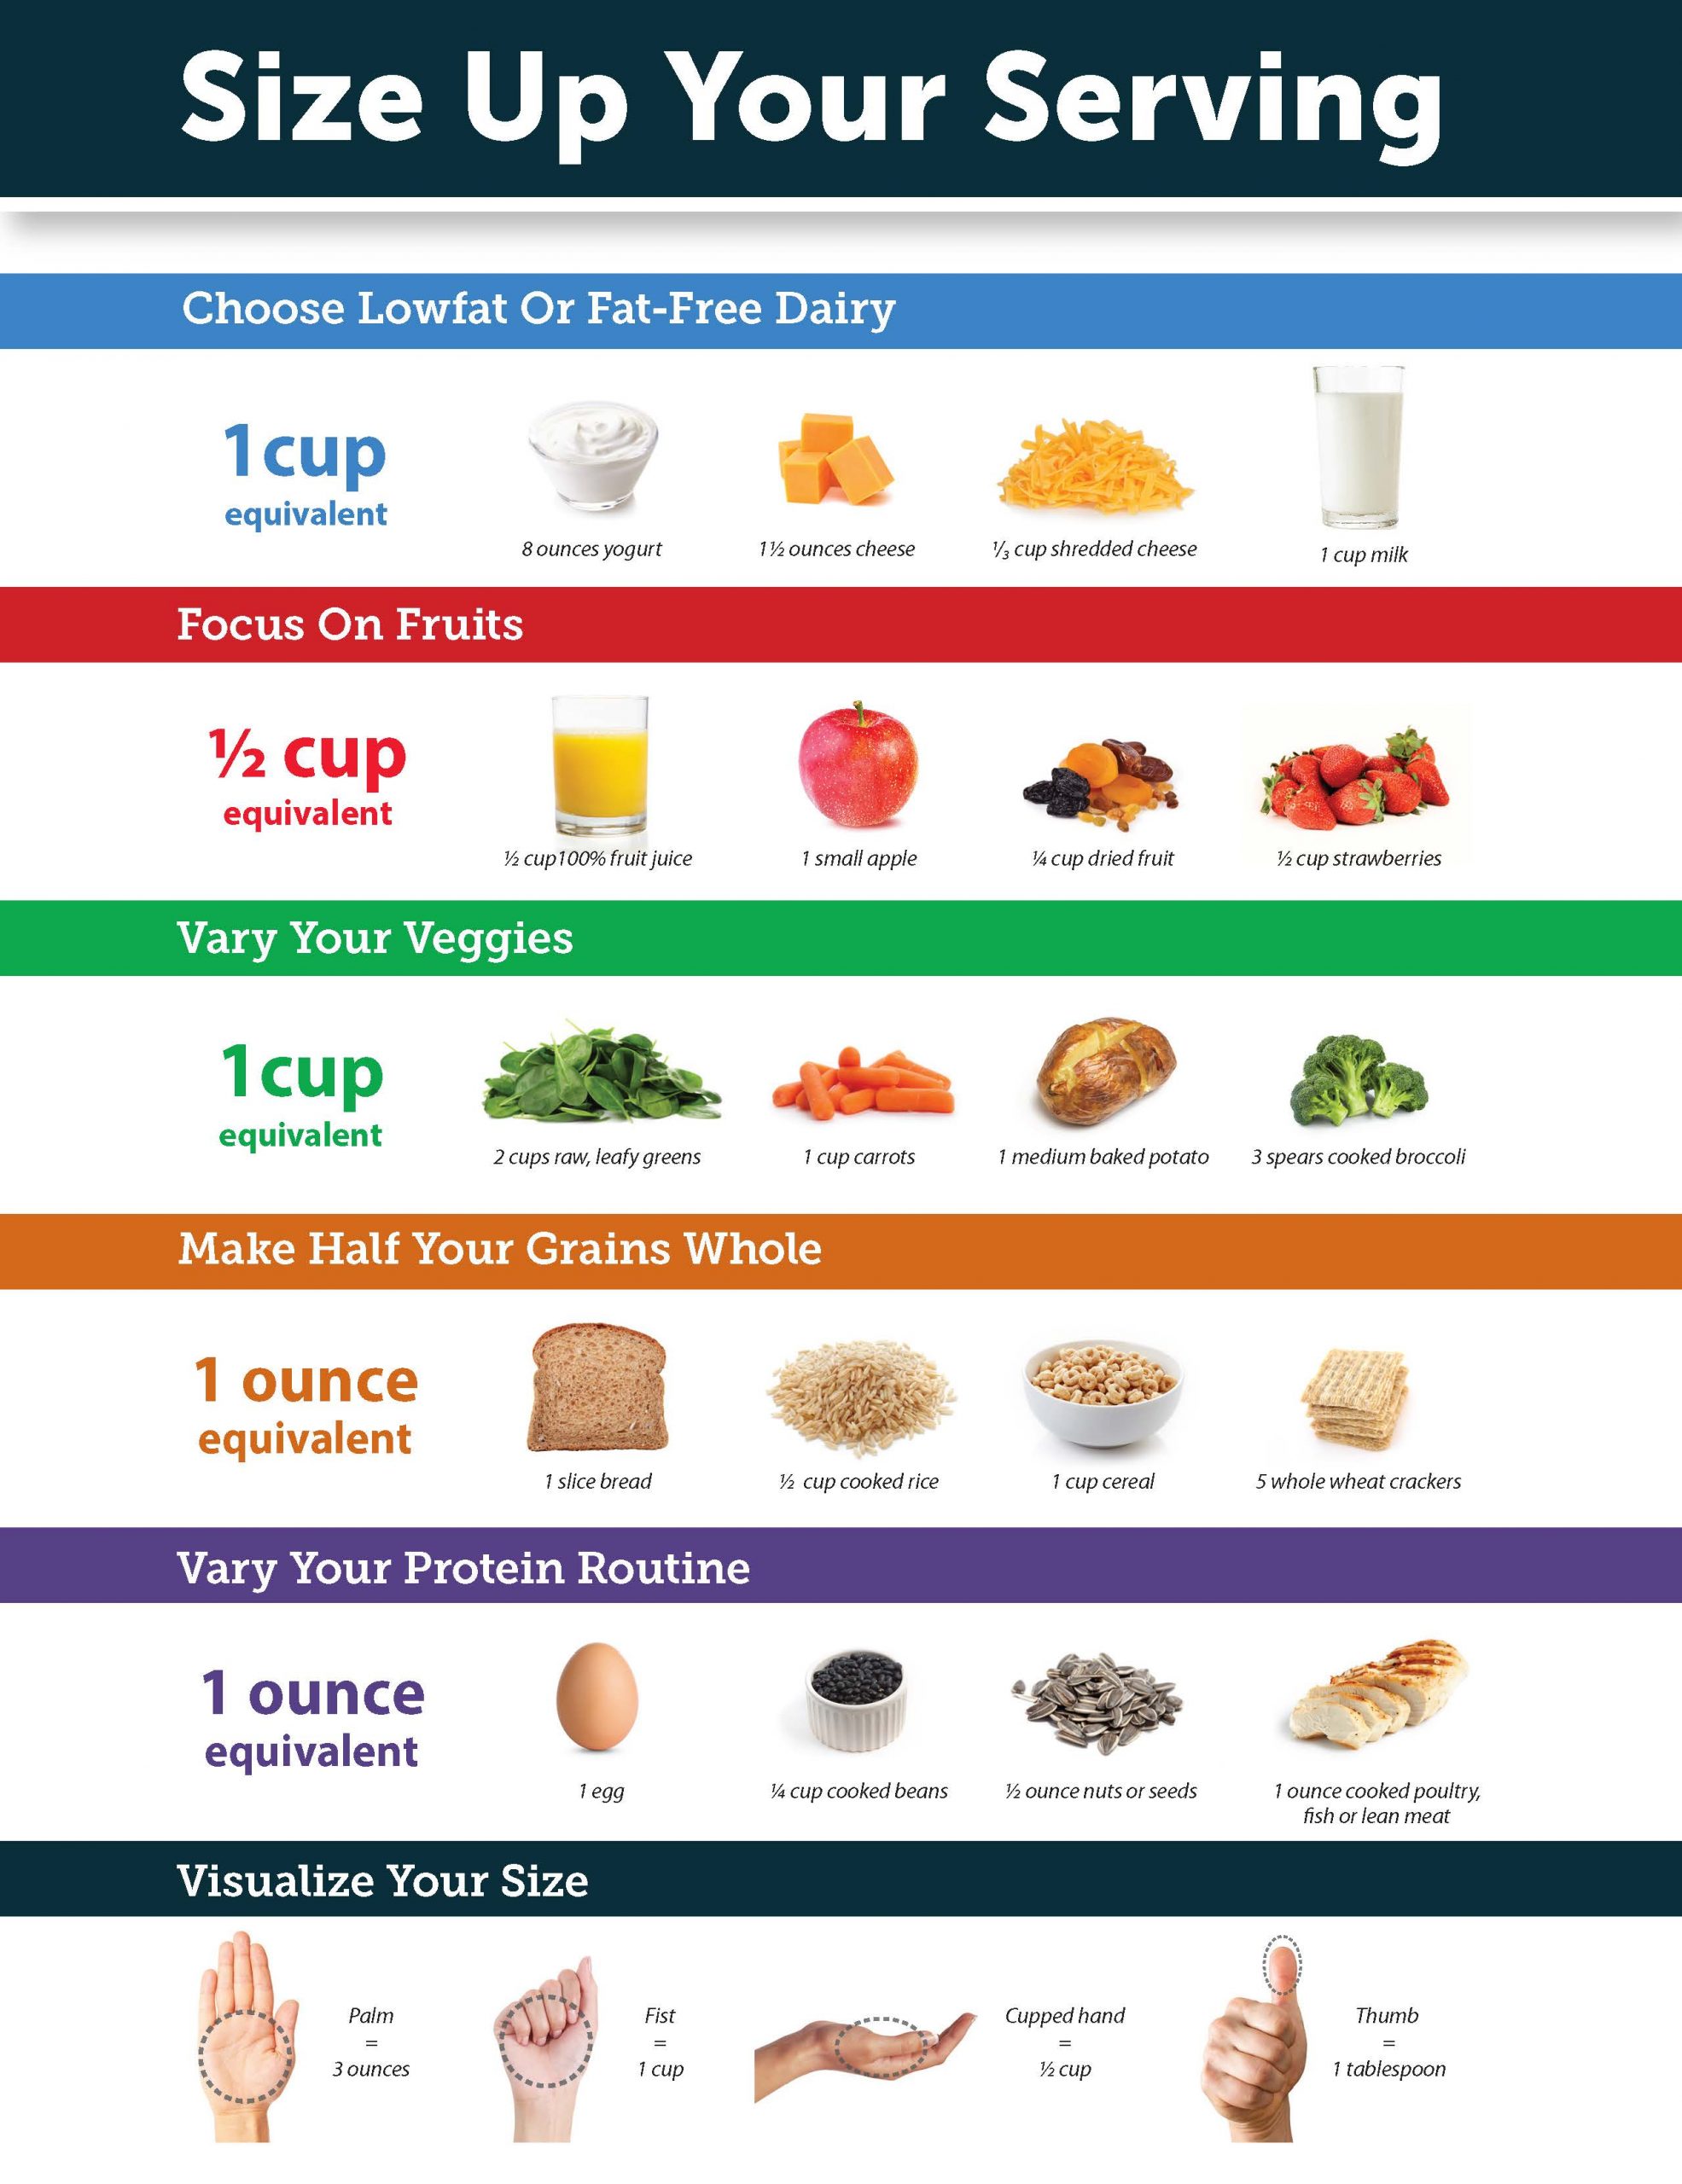 recommended serving sizes